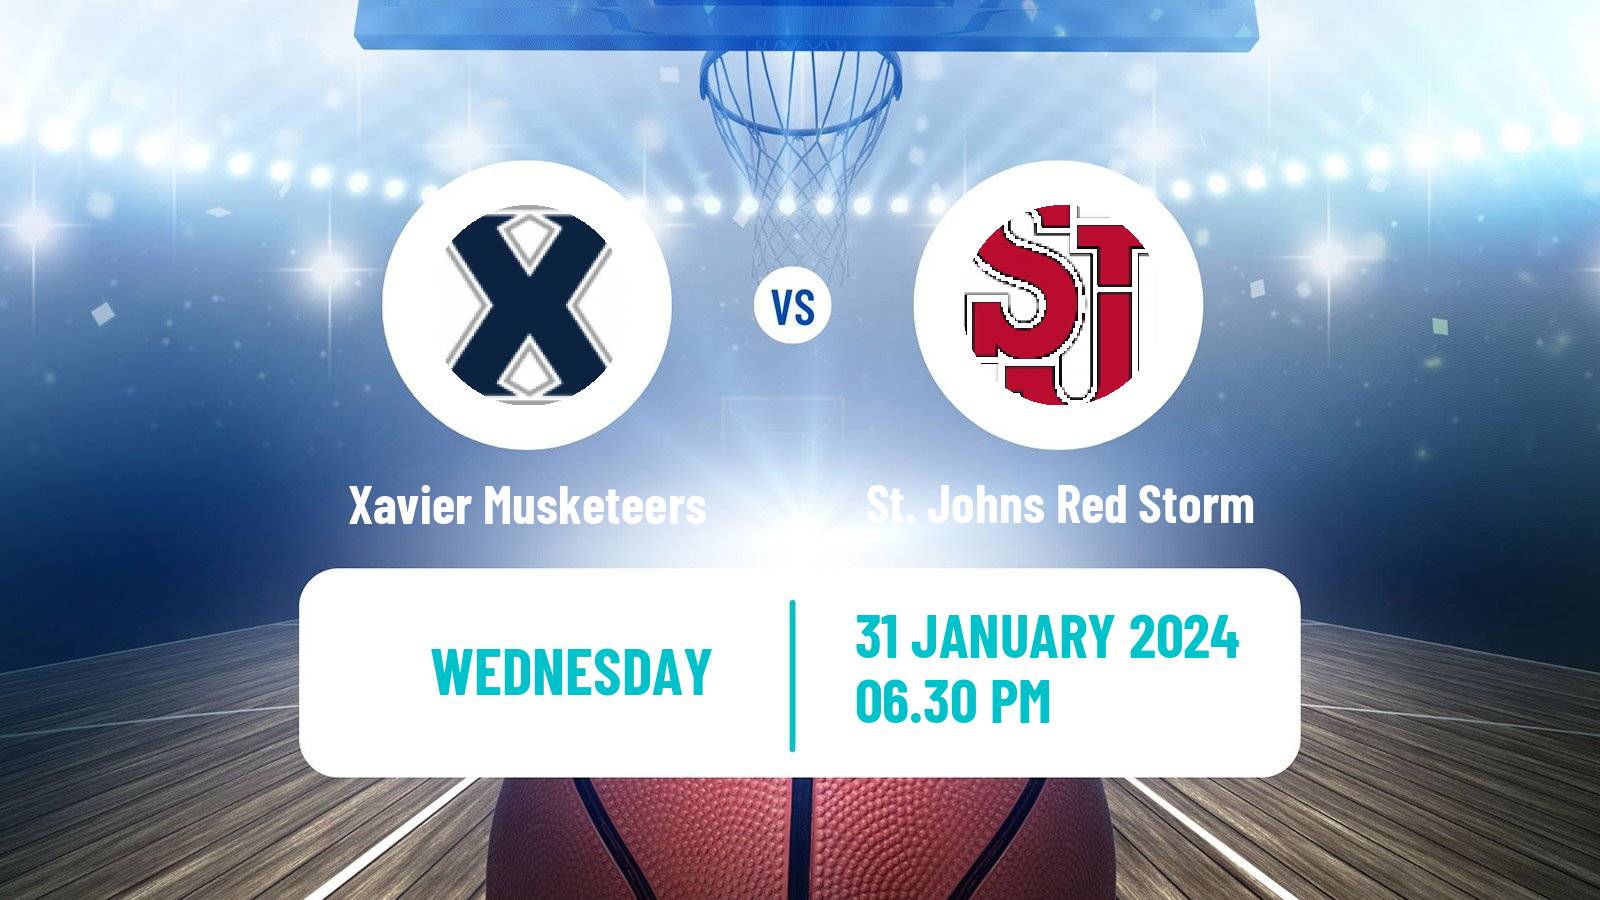 Basketball NCAA College Basketball Xavier Musketeers - St. Johns Red Storm